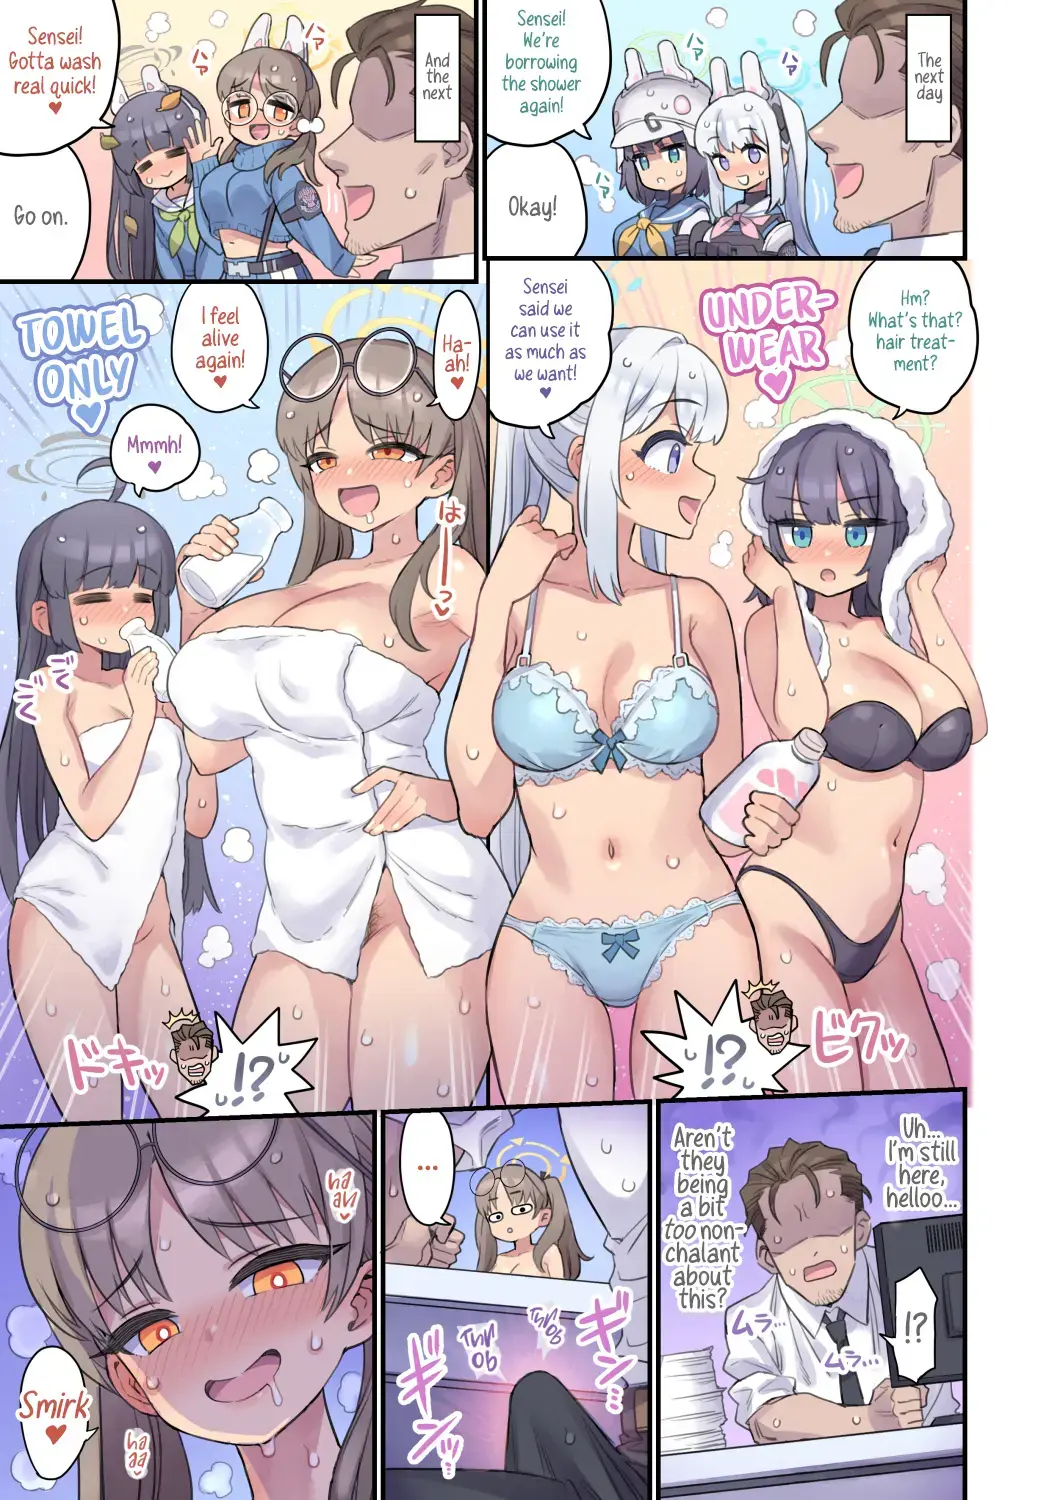 [Mimonel] Seito to Issen Koechau Hon RABBIT Shoutai Hen | Crossing the Line With My Students - RABBIT Squad Edition Fhentai.net - Page 4